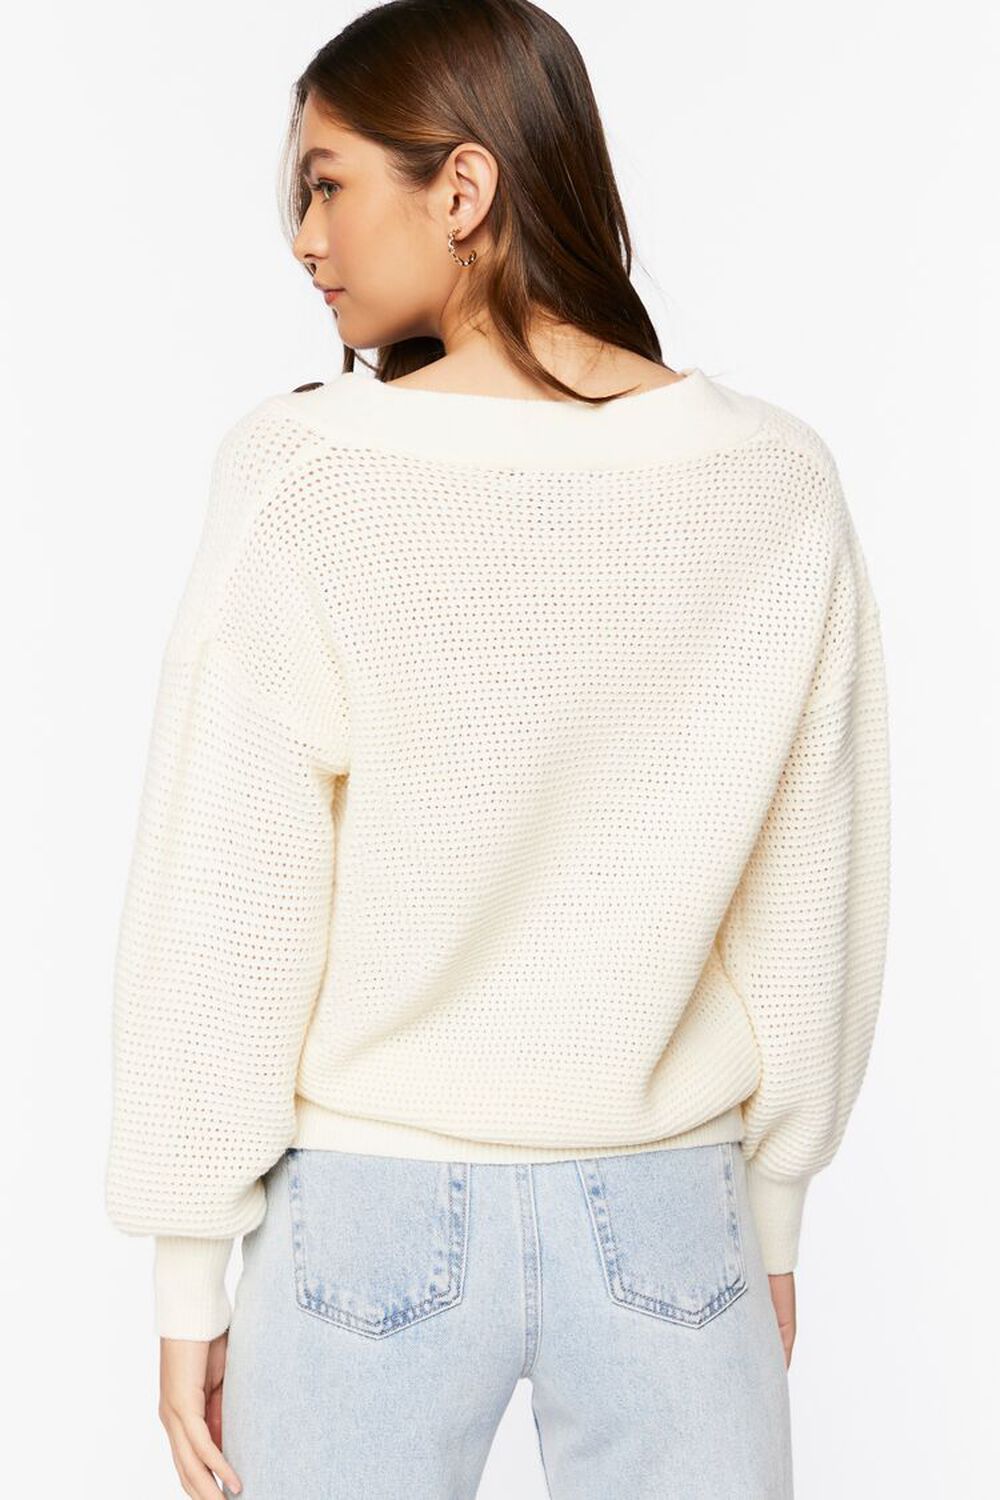 CREAM Open-Knit Buttoned Sweater, image 3